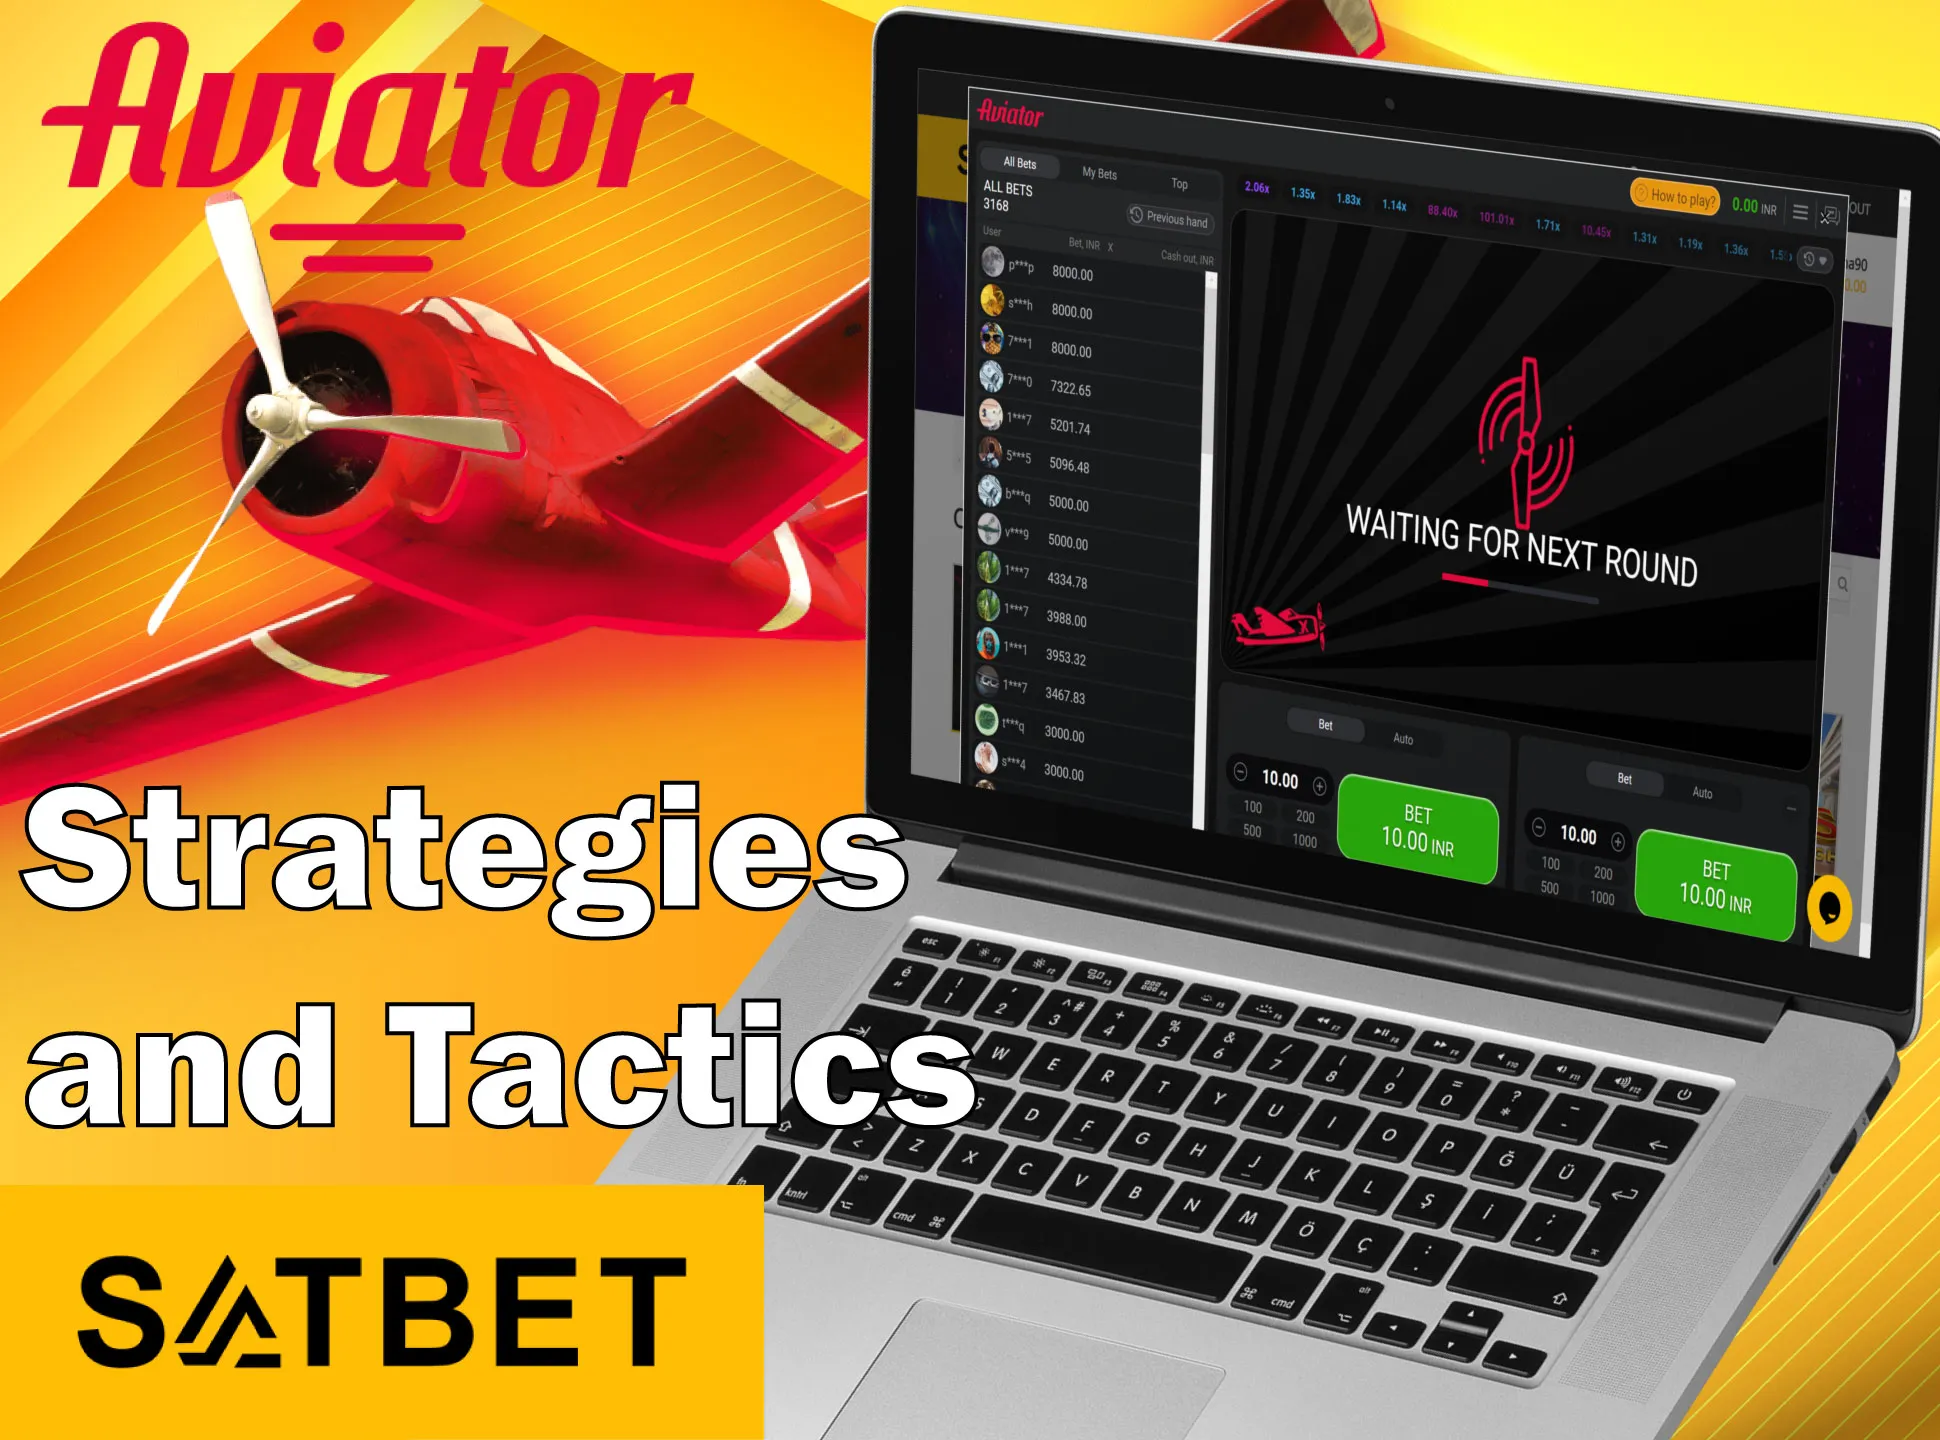 Follow simple tips from Satbet when playing Aviator.